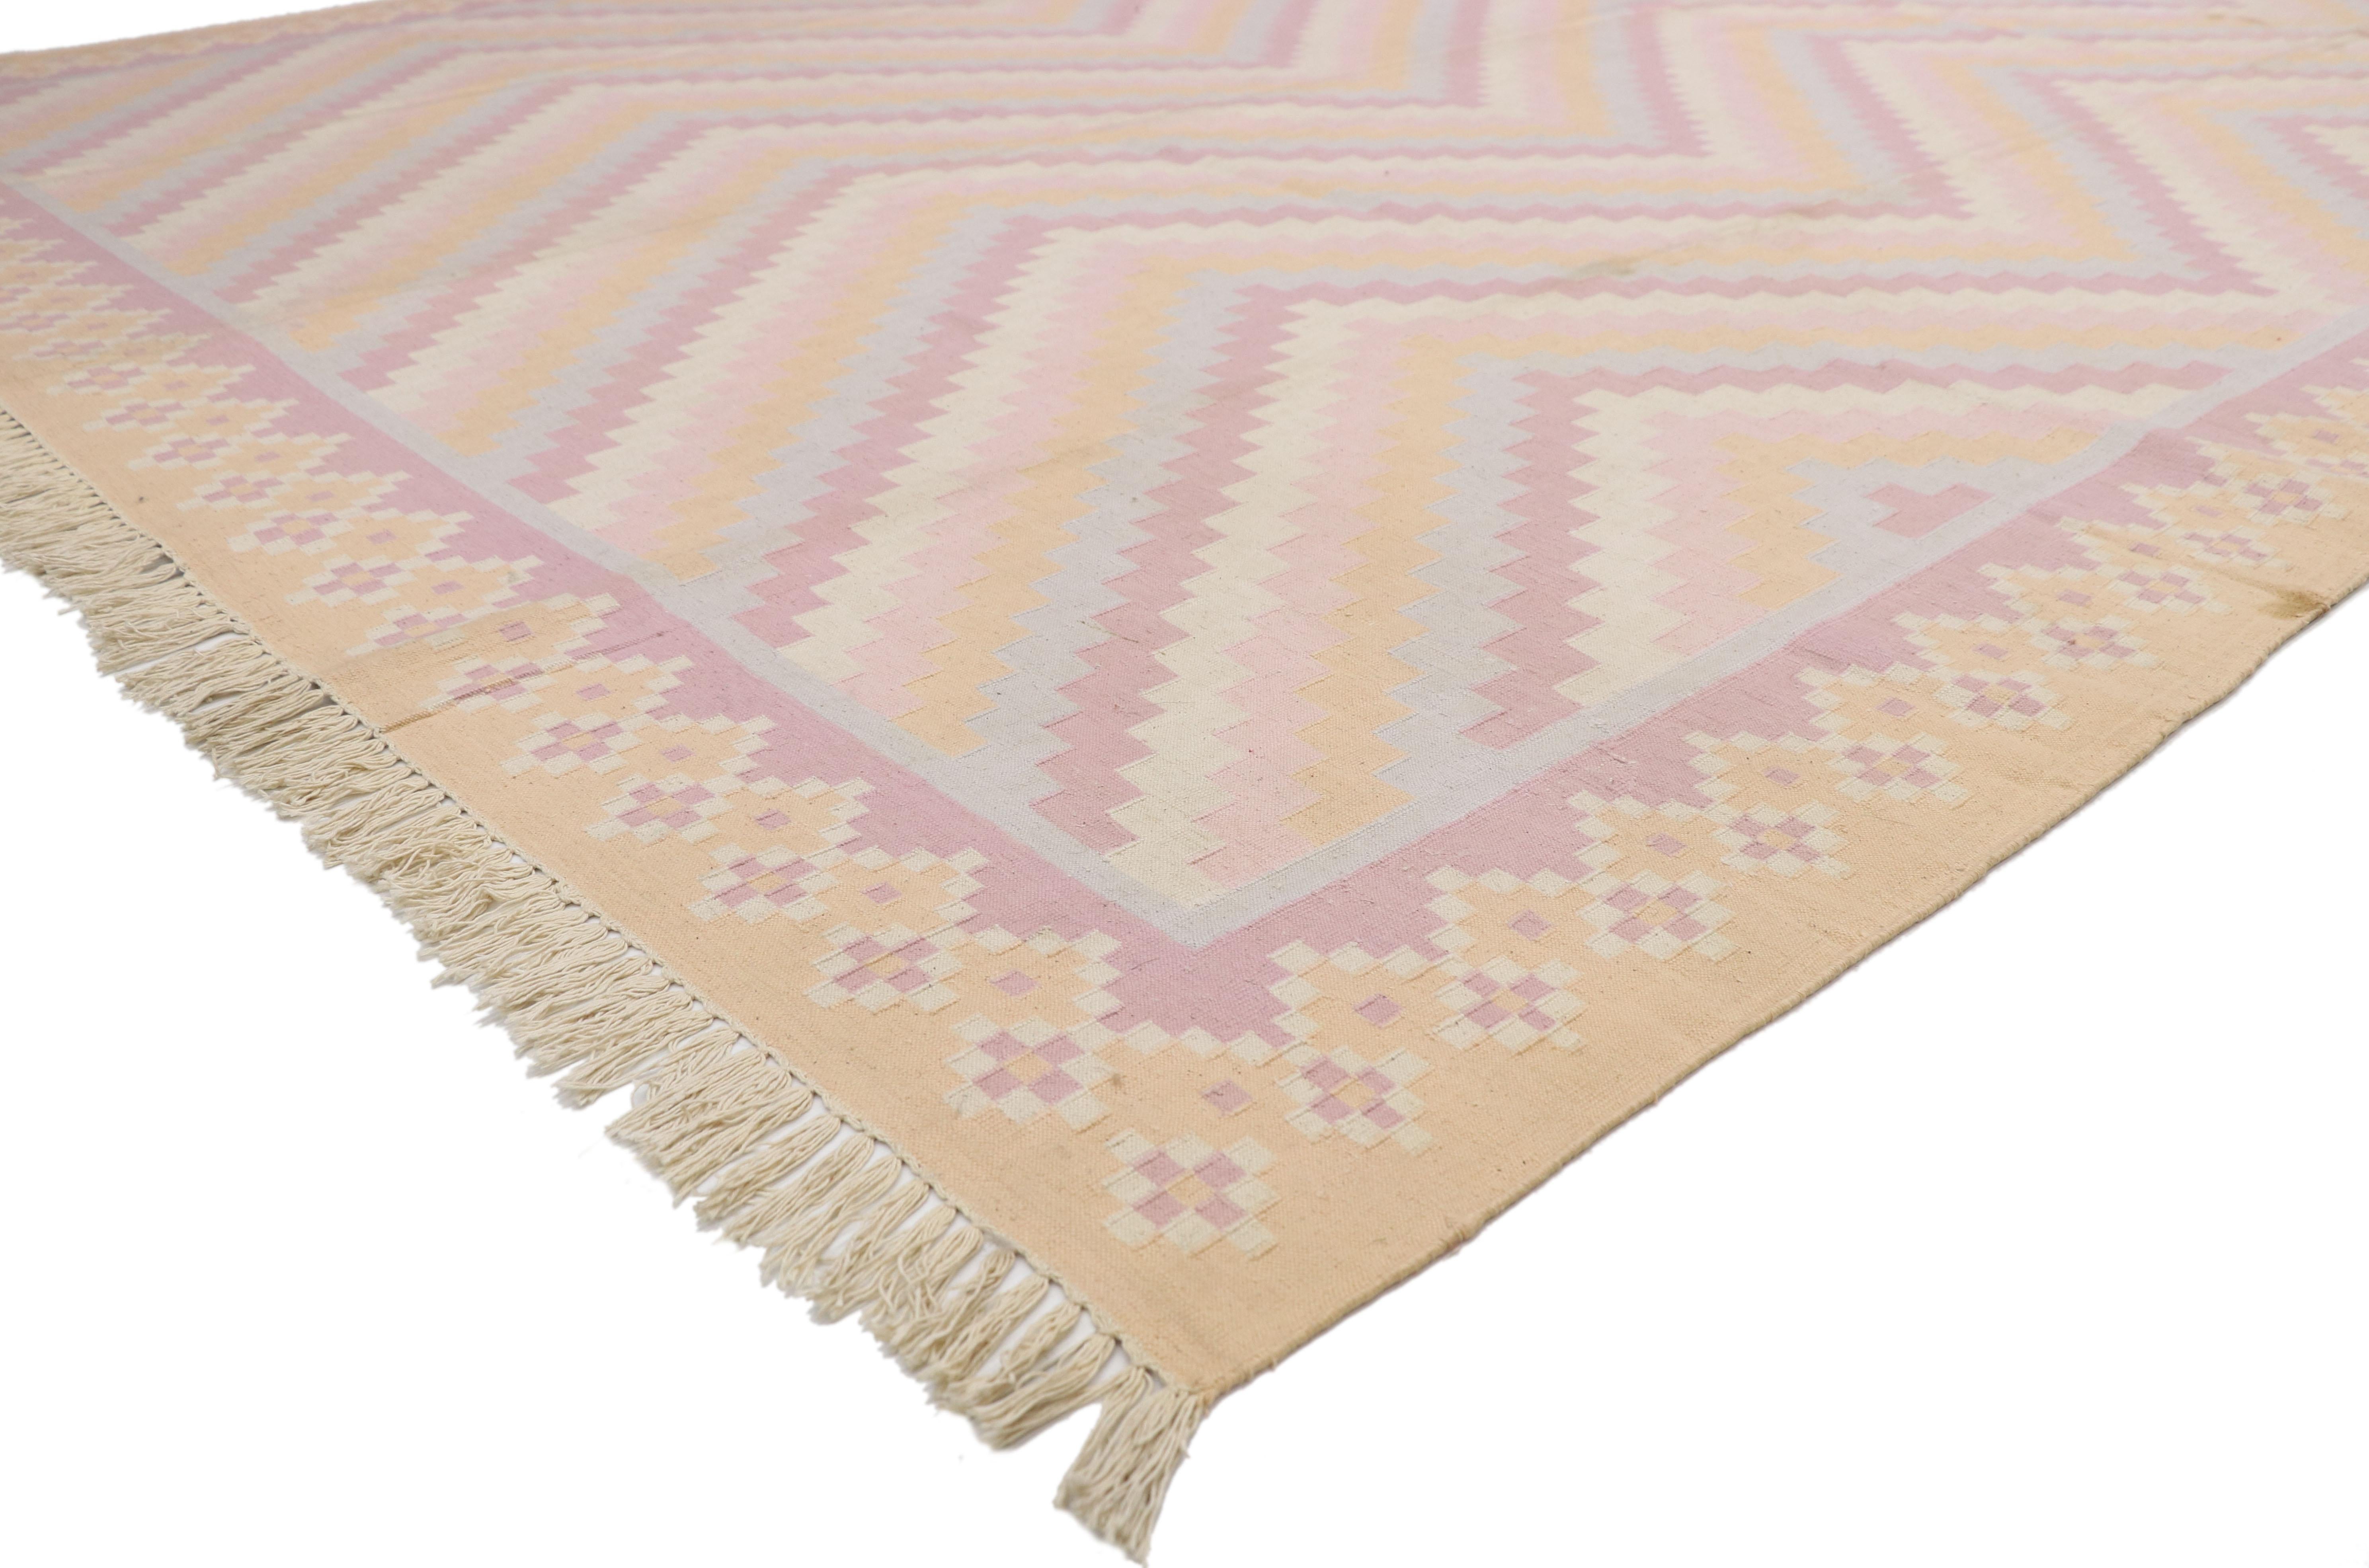 70502, vintage Dhurrie area rug with Pastel colors and coastal Bohemian style. Pale pastel hues and soft elegance bring harmony to this handwoven wool vintage Dhurrie rug distilling the key elements and a playful chevron pattern. A beautiful display